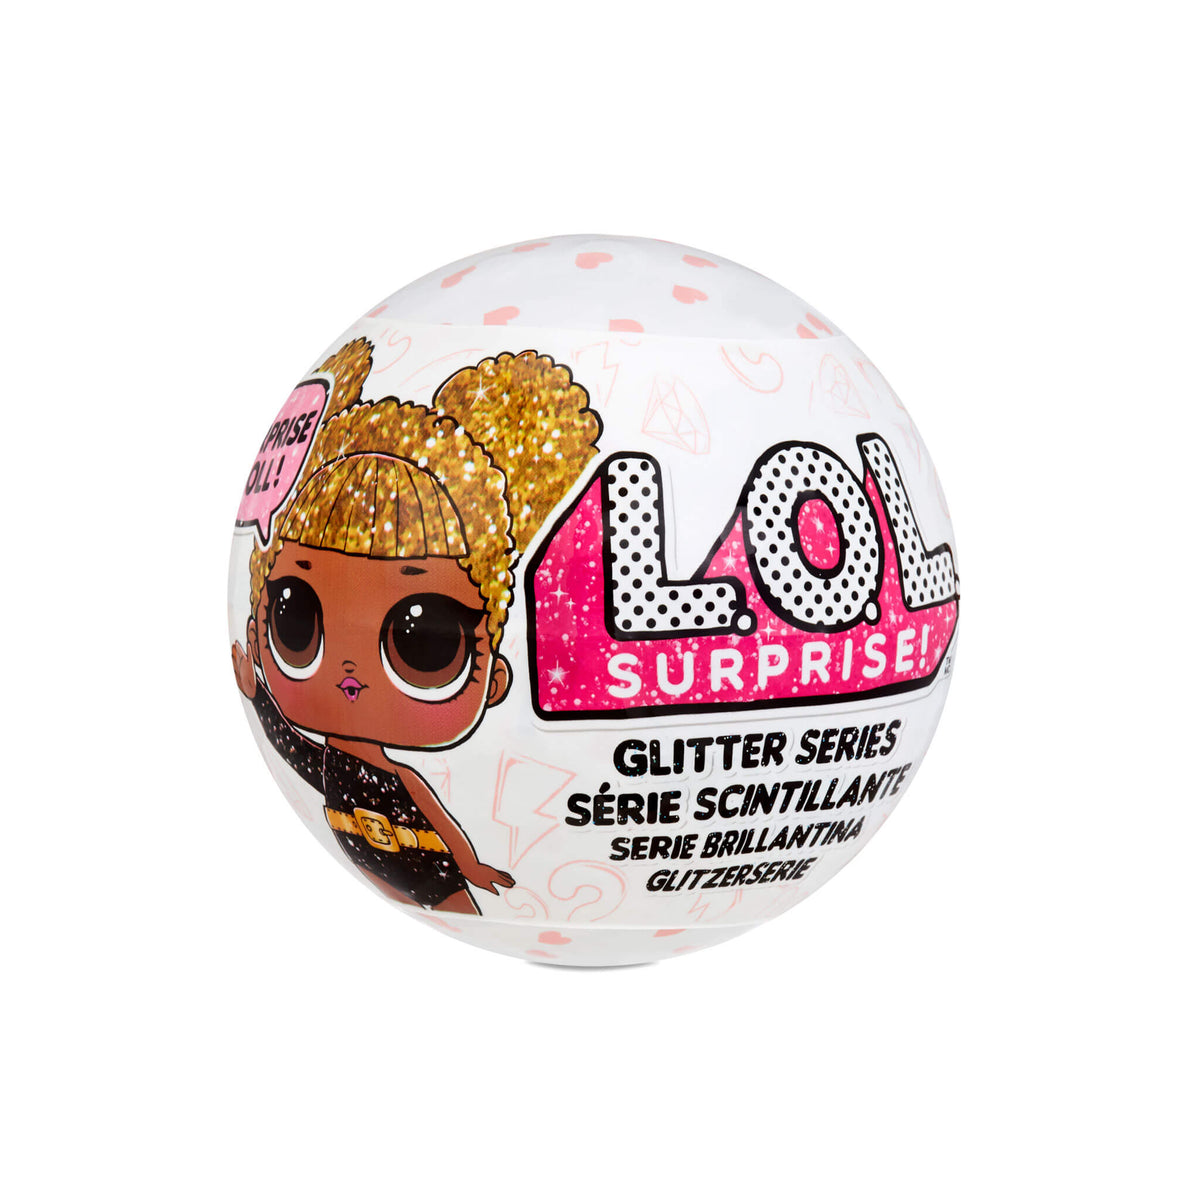 LOL Surprise Glitter 3-Pack- Style 1 - 3 Re-released Dolls Each with 7